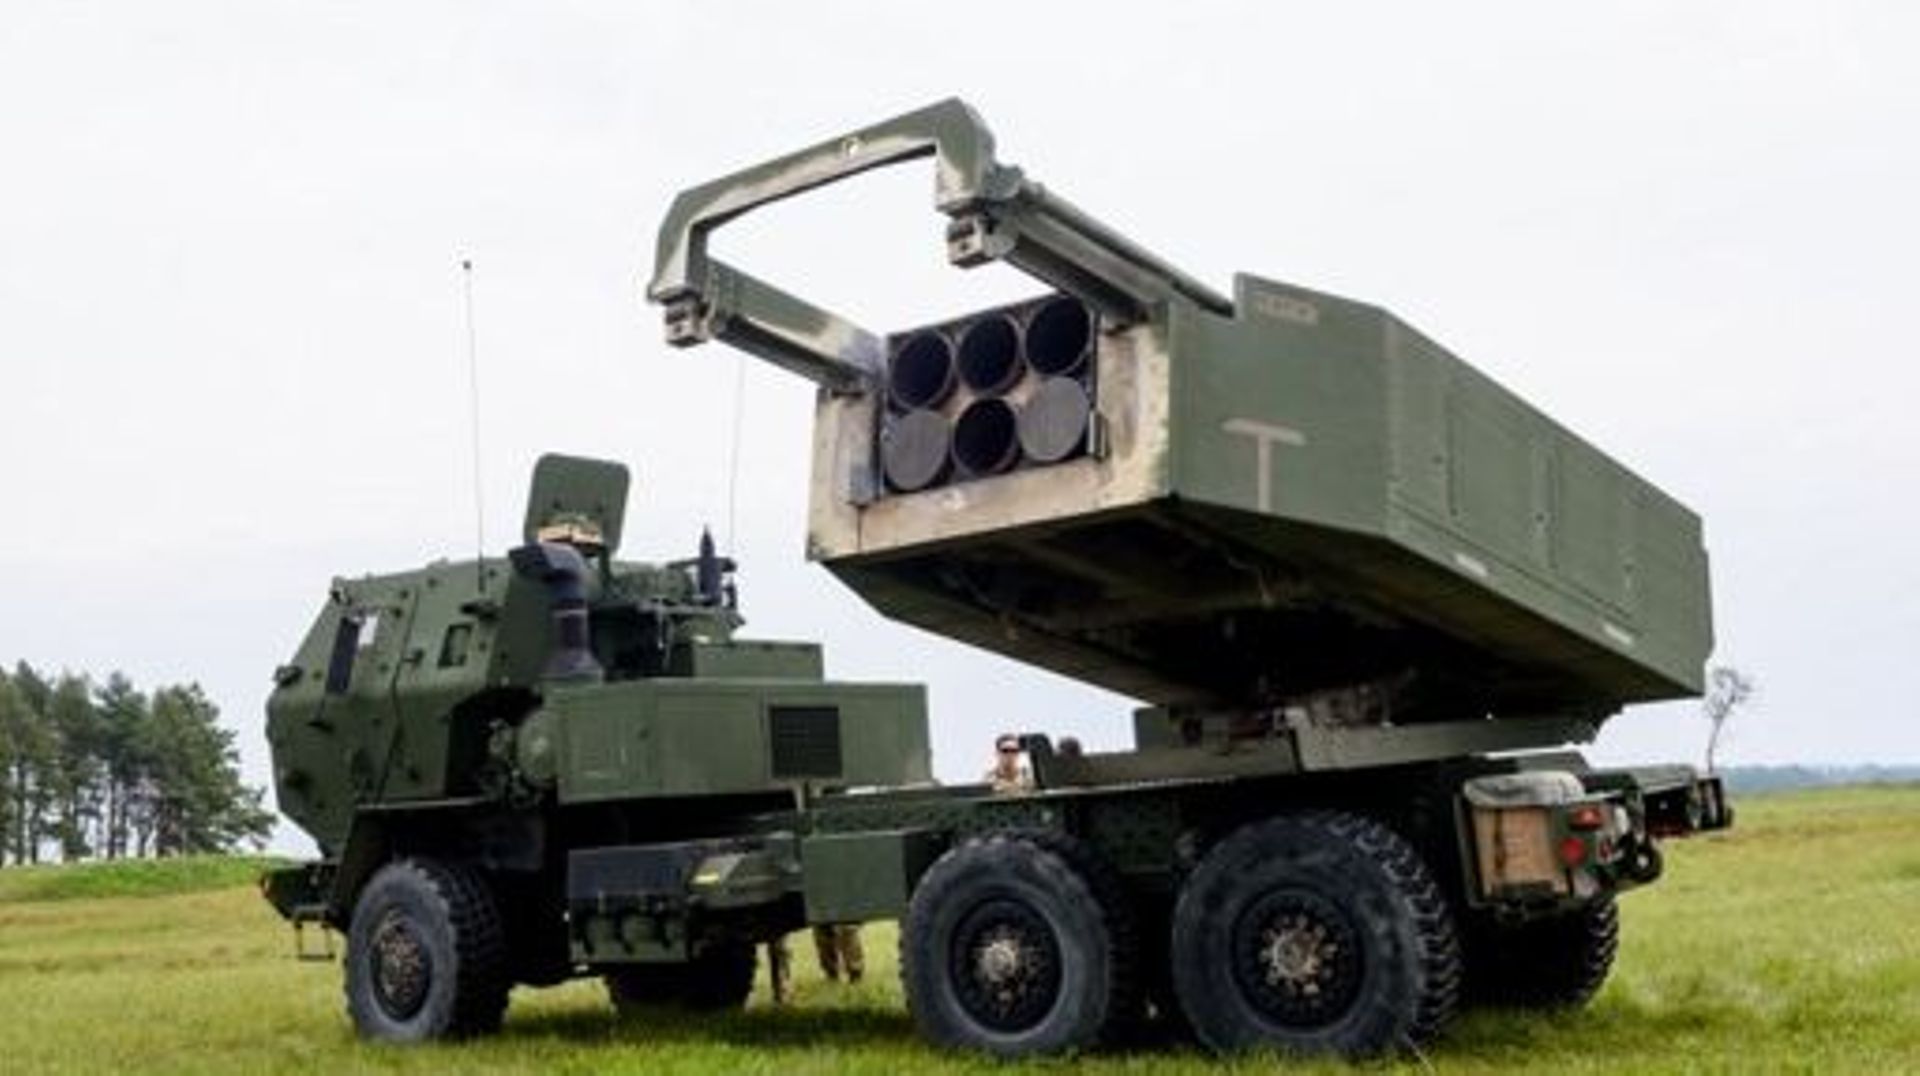 The High Mobility Artillery Rocket Systems (HIMARS) is pictured during the military exercise "Namejs 2022" on September 26, 2022 in Skede, Latvia.   Gints Ivuskans / AFP